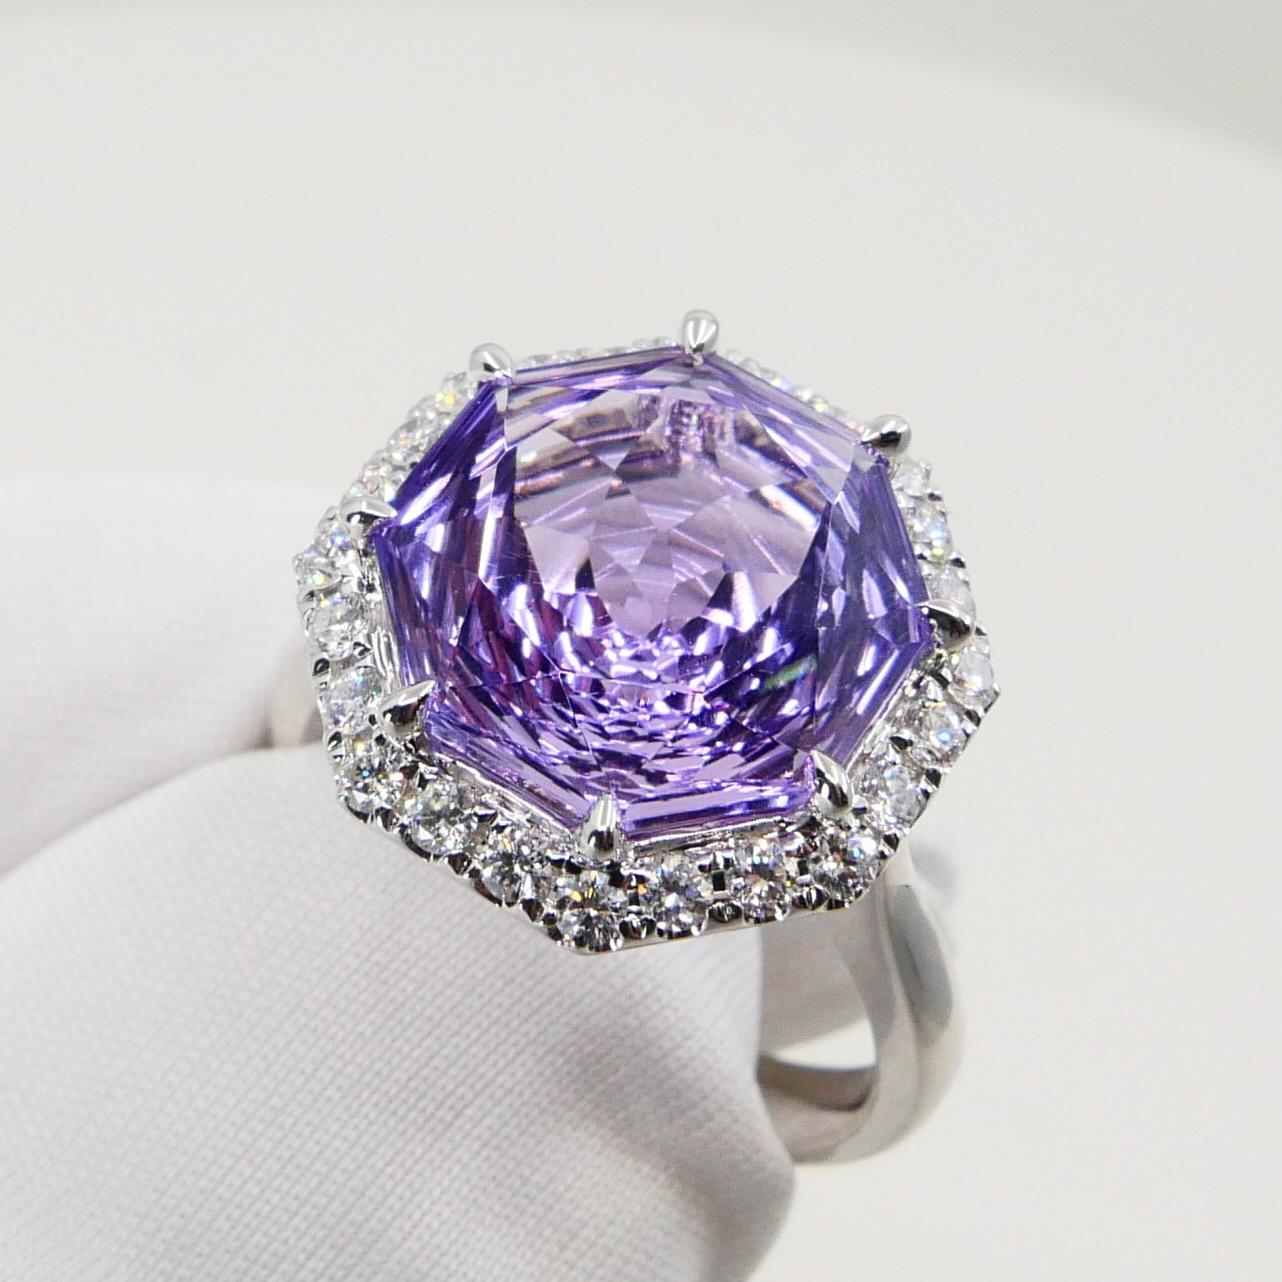 Please check out the HD video! Here is a super unique flower cut amethyst and diamond cocktail statement ring. It is set in 18k white gold. The 5.32 cts center amethyst is stunning. The flower cut is spectacular and is rarely seen cut to this kind